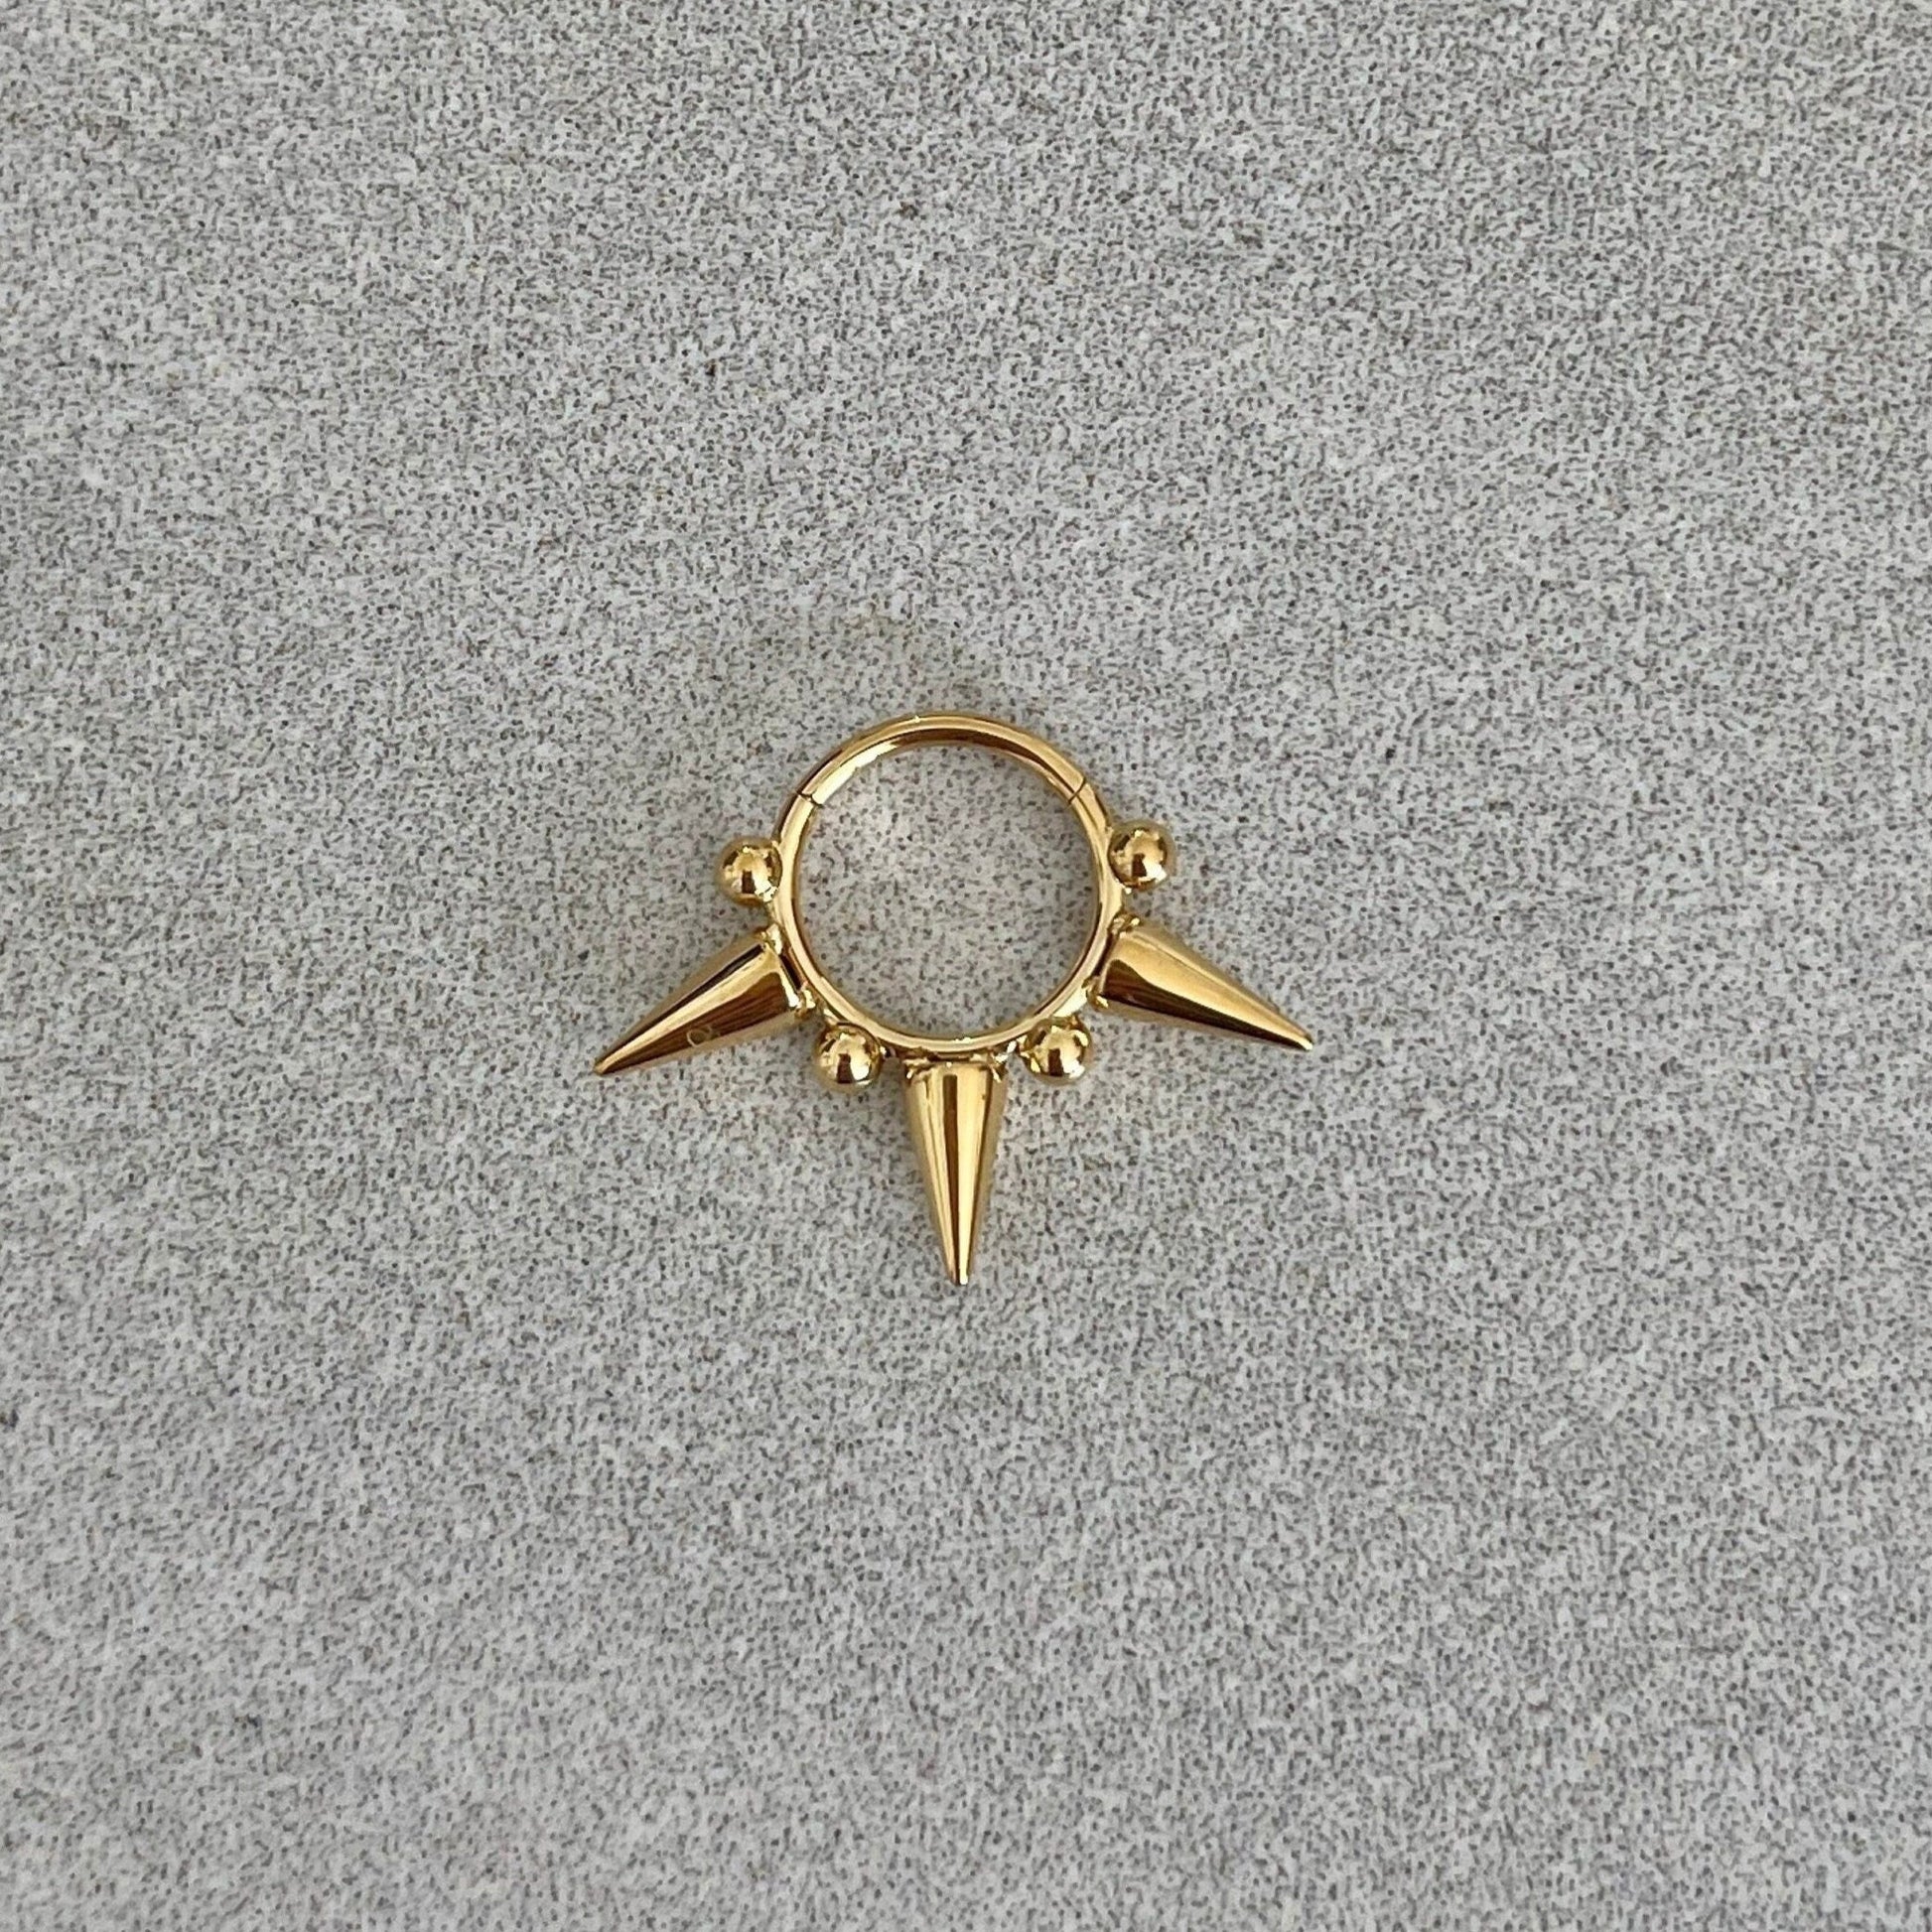 Spike Septum Piercing (16G or 18G | 8mm or 10mm | Surgical Steel | Gold, Black or Silver)